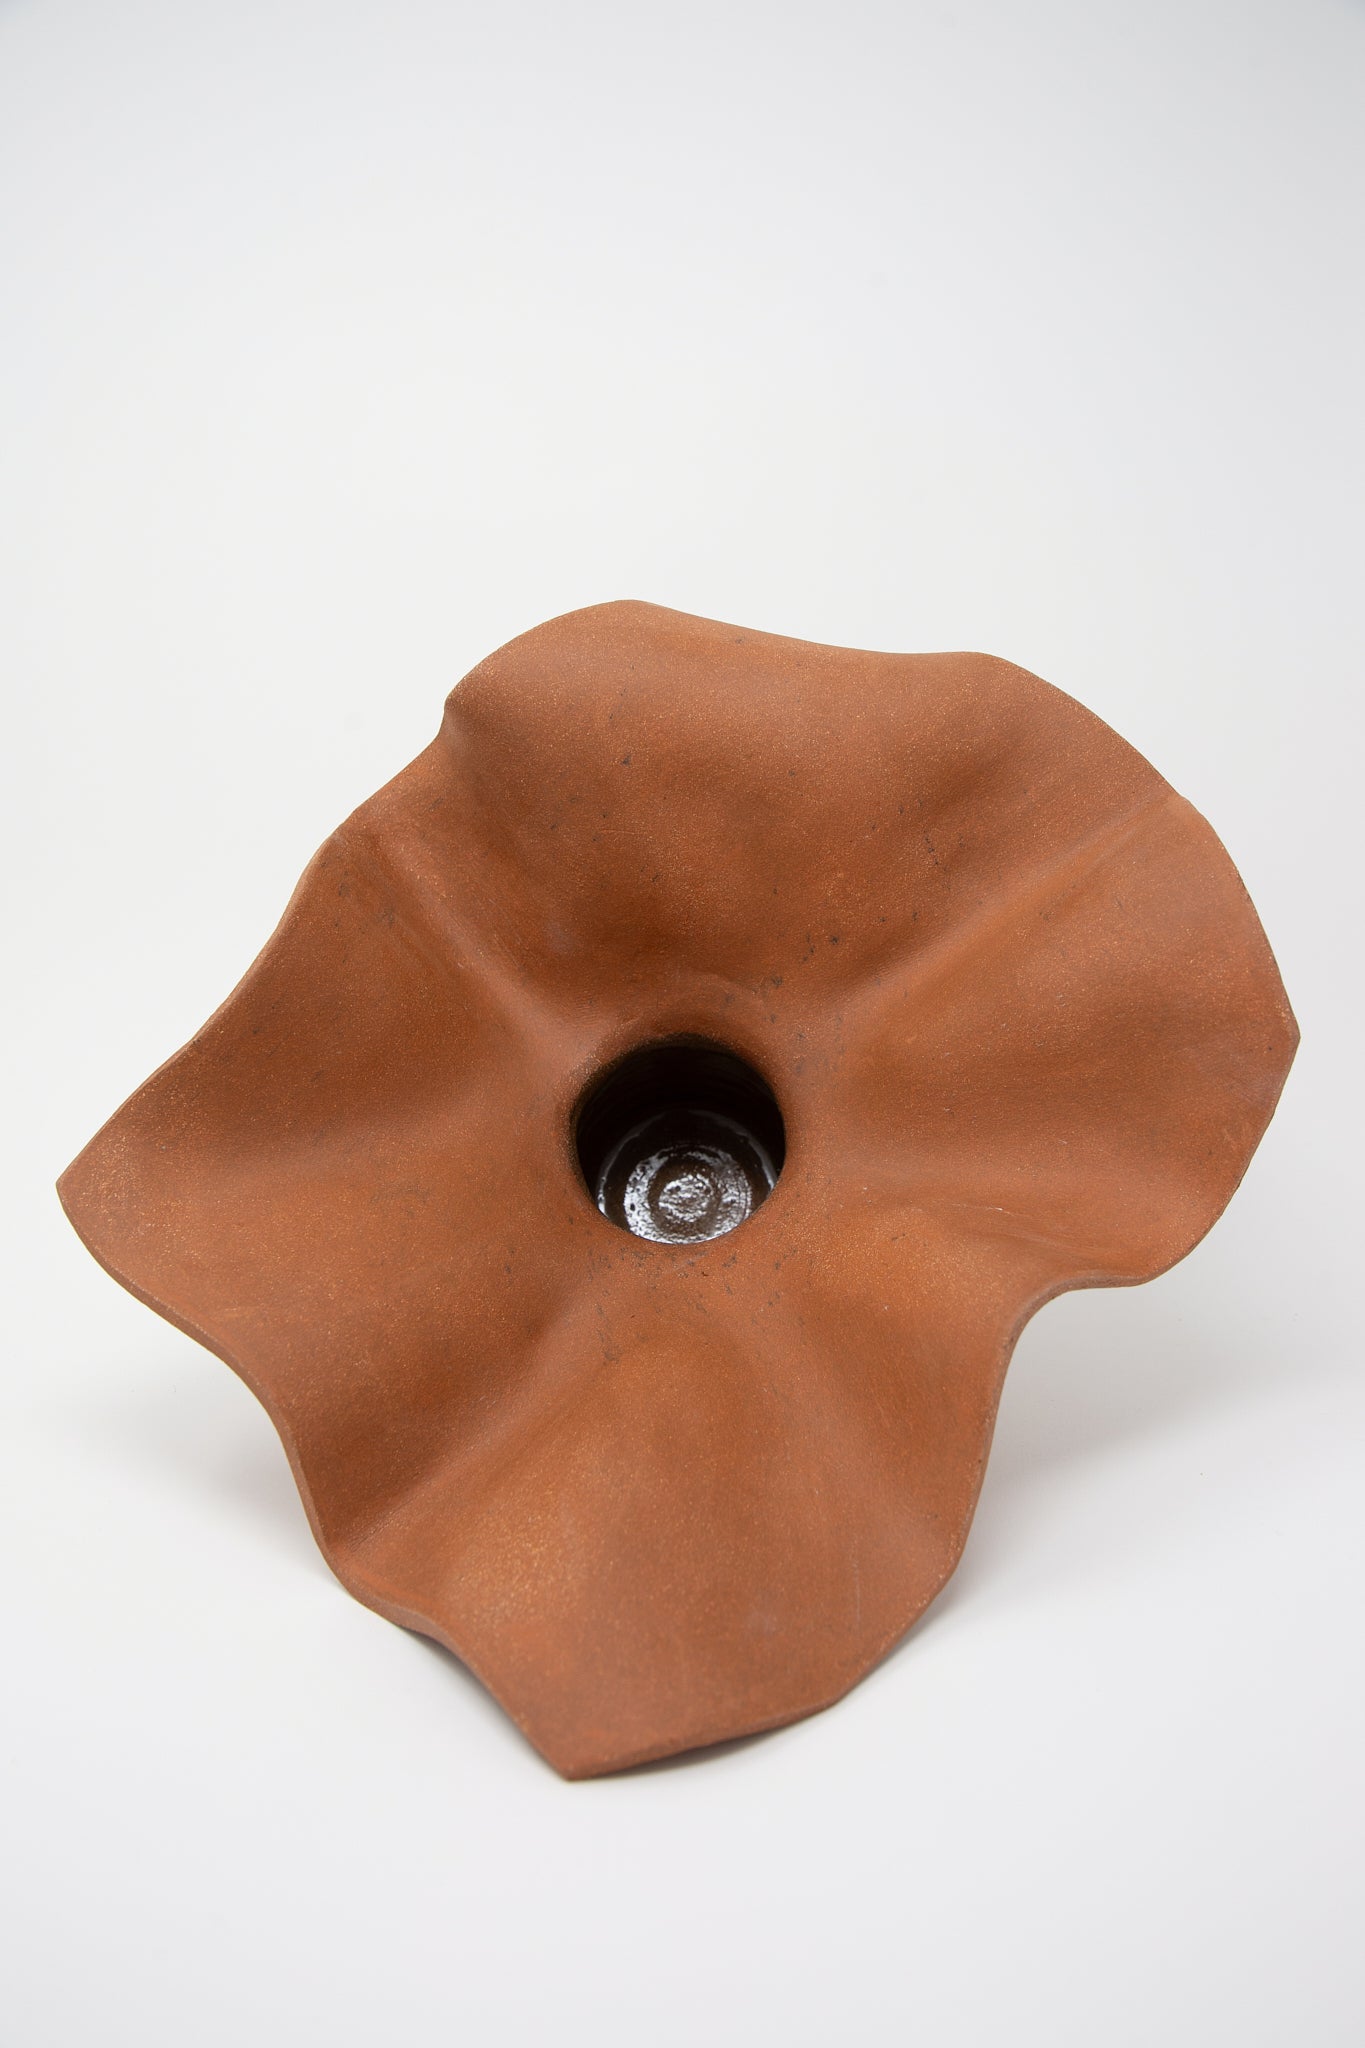 A Lost Quarry Ruffle Pedestal in Terracotta sculpture featuring a ceramic flower with a hole in the middle. Overhead view.